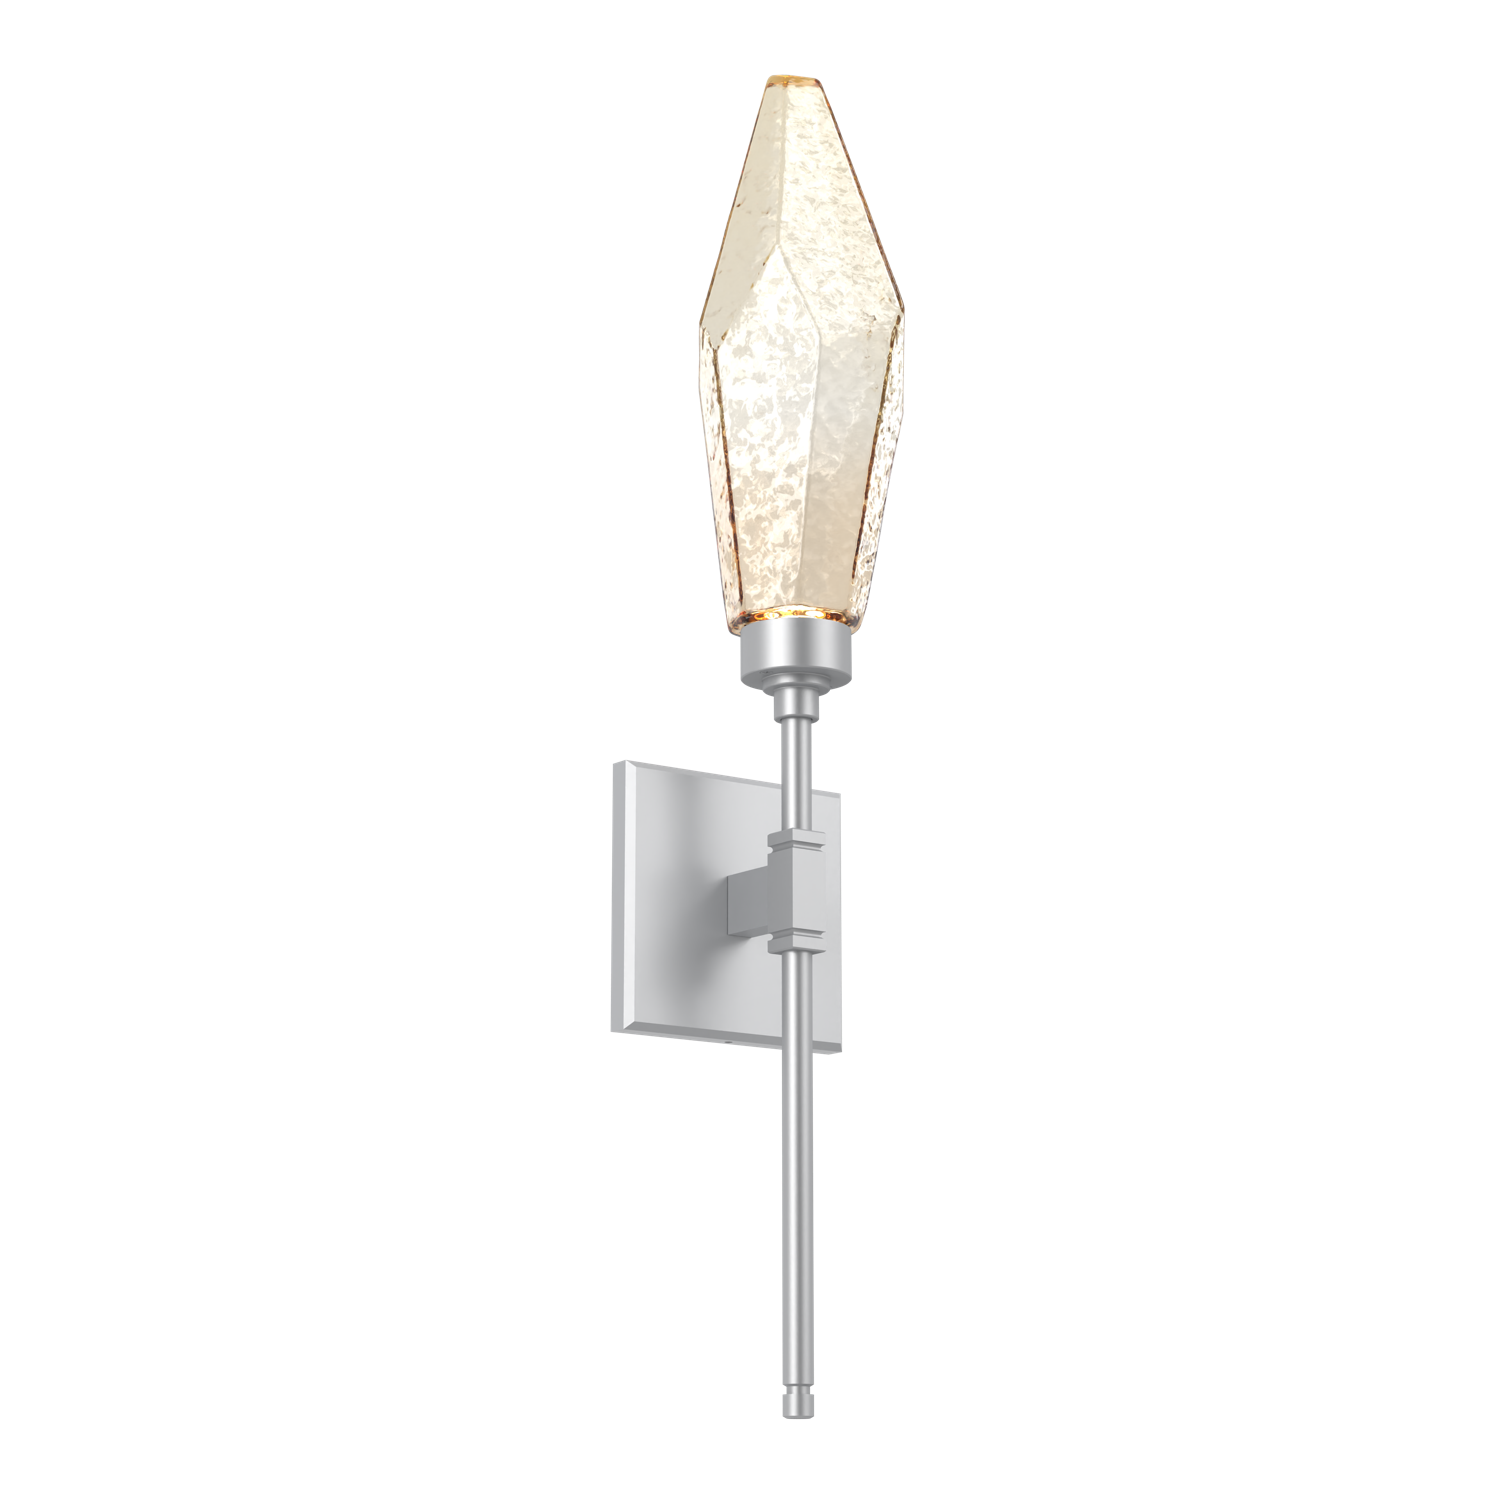 IDB0050-04-CS-CA-Hammerton-Studio-Rock-Crystal-ada-certified-belvedere-wall-sconce-with-classic-silver-finish-and-chilled-amber-blown-glass-shades-and-LED-lamping